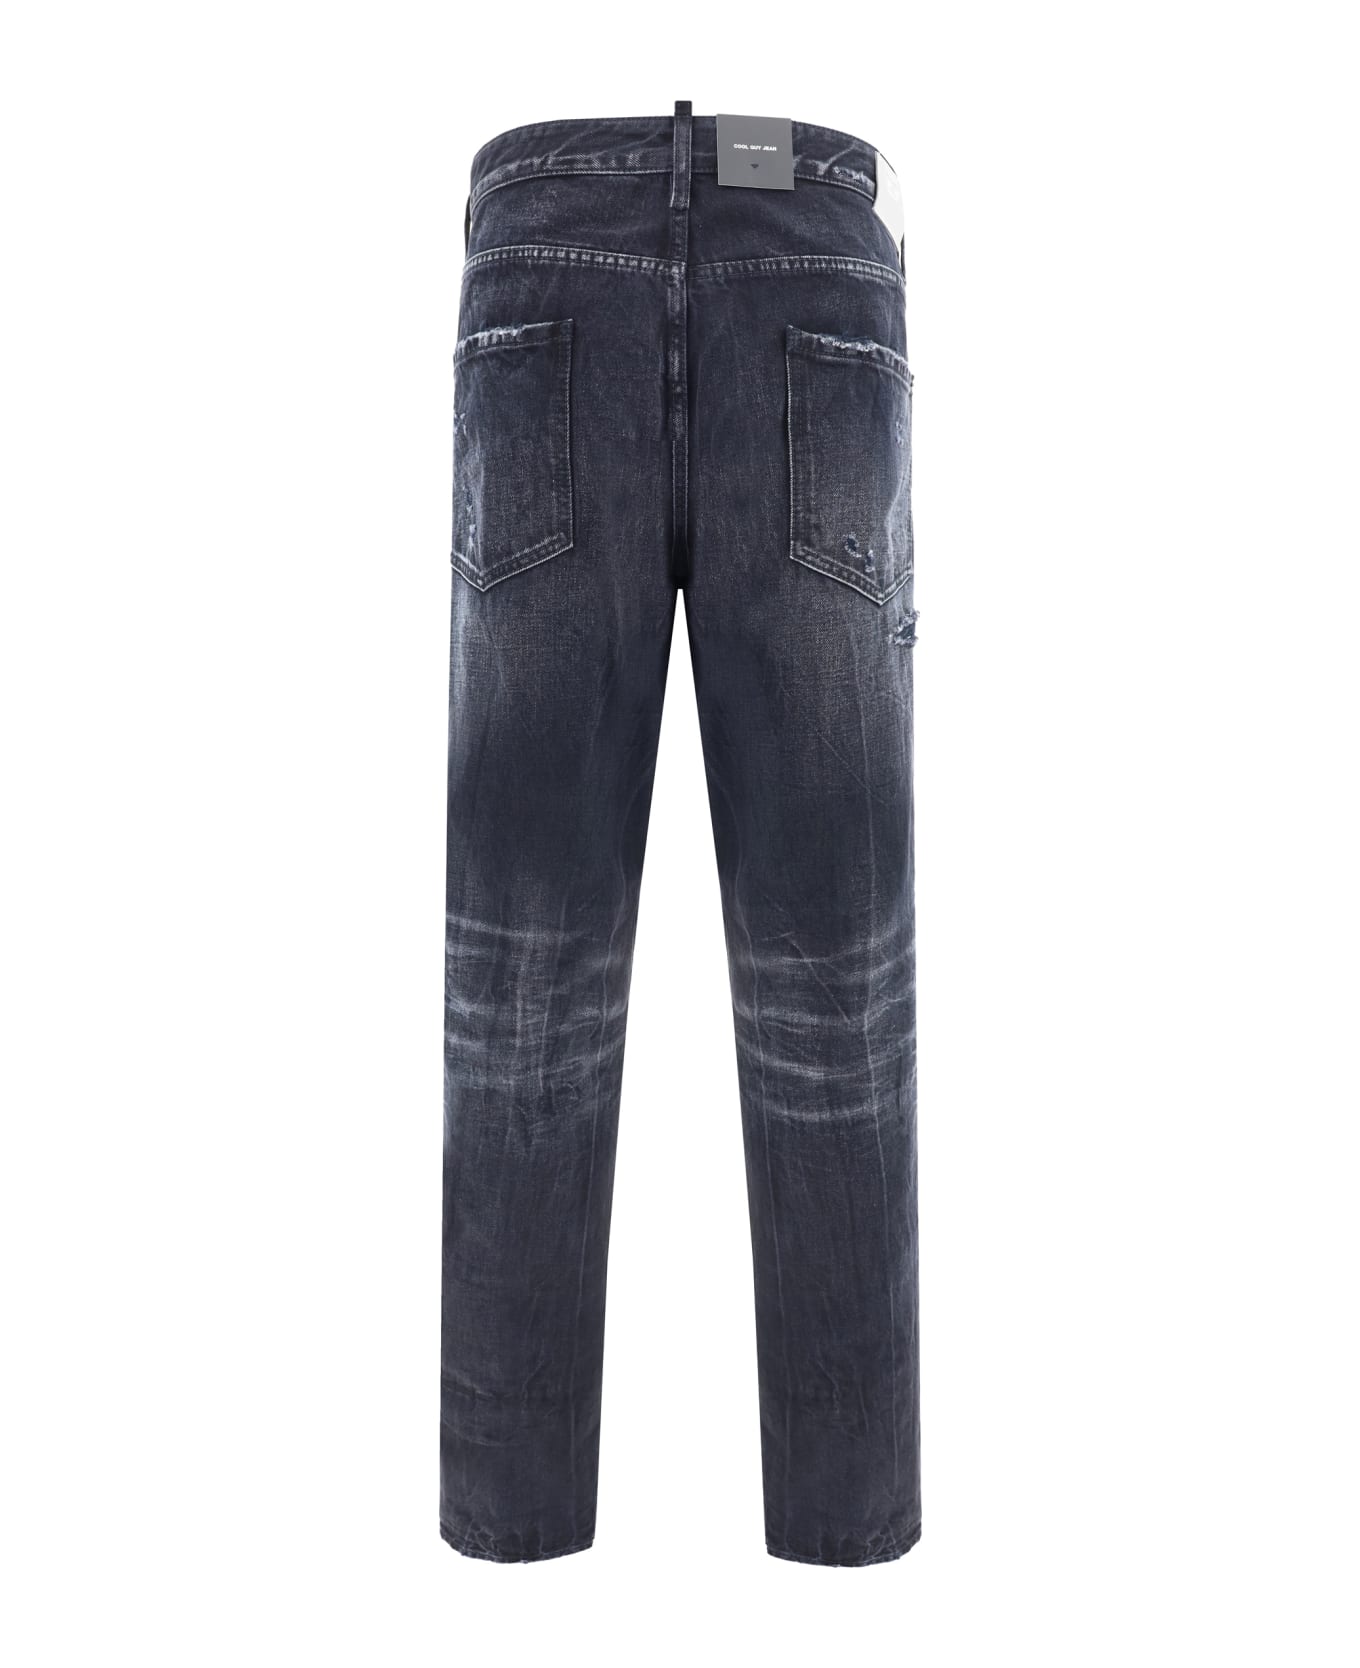 Dsquared2 Cool Guy Jeans - Black